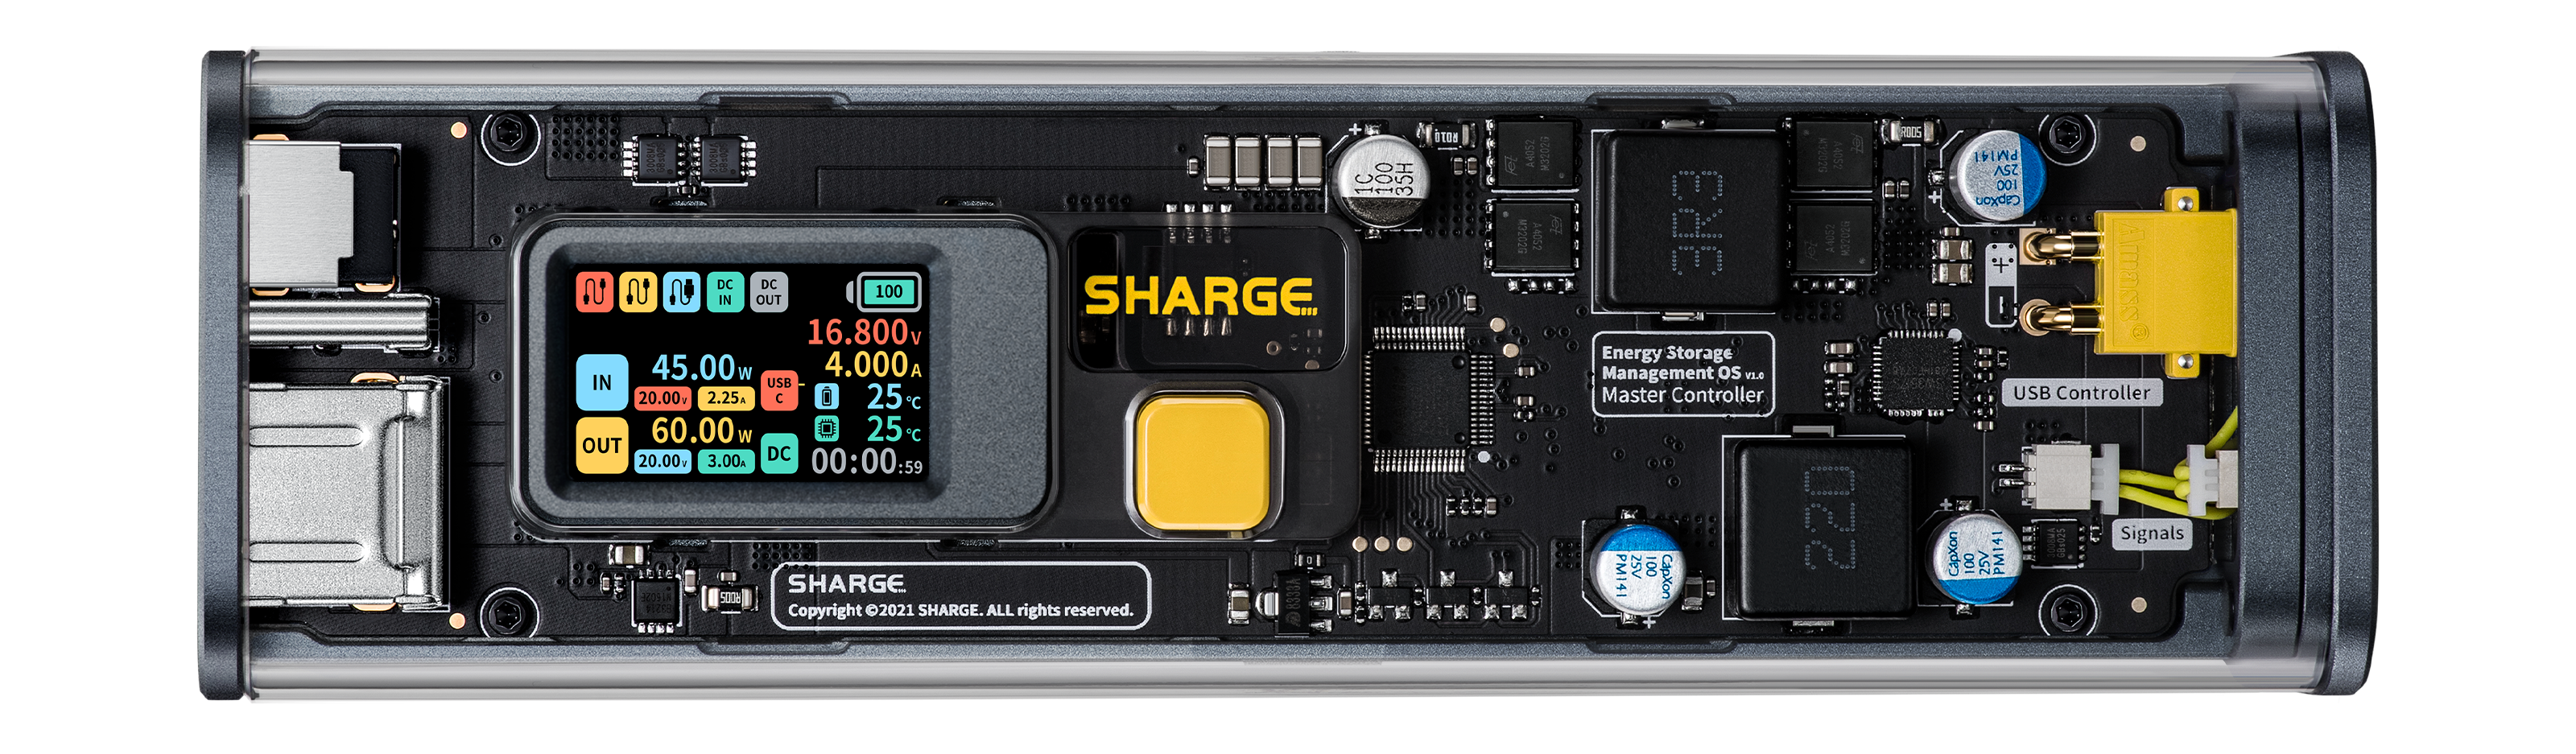 Sharge 100 W Transparent Power Bank: The Ultimate Geeky Power Bank - Shouts